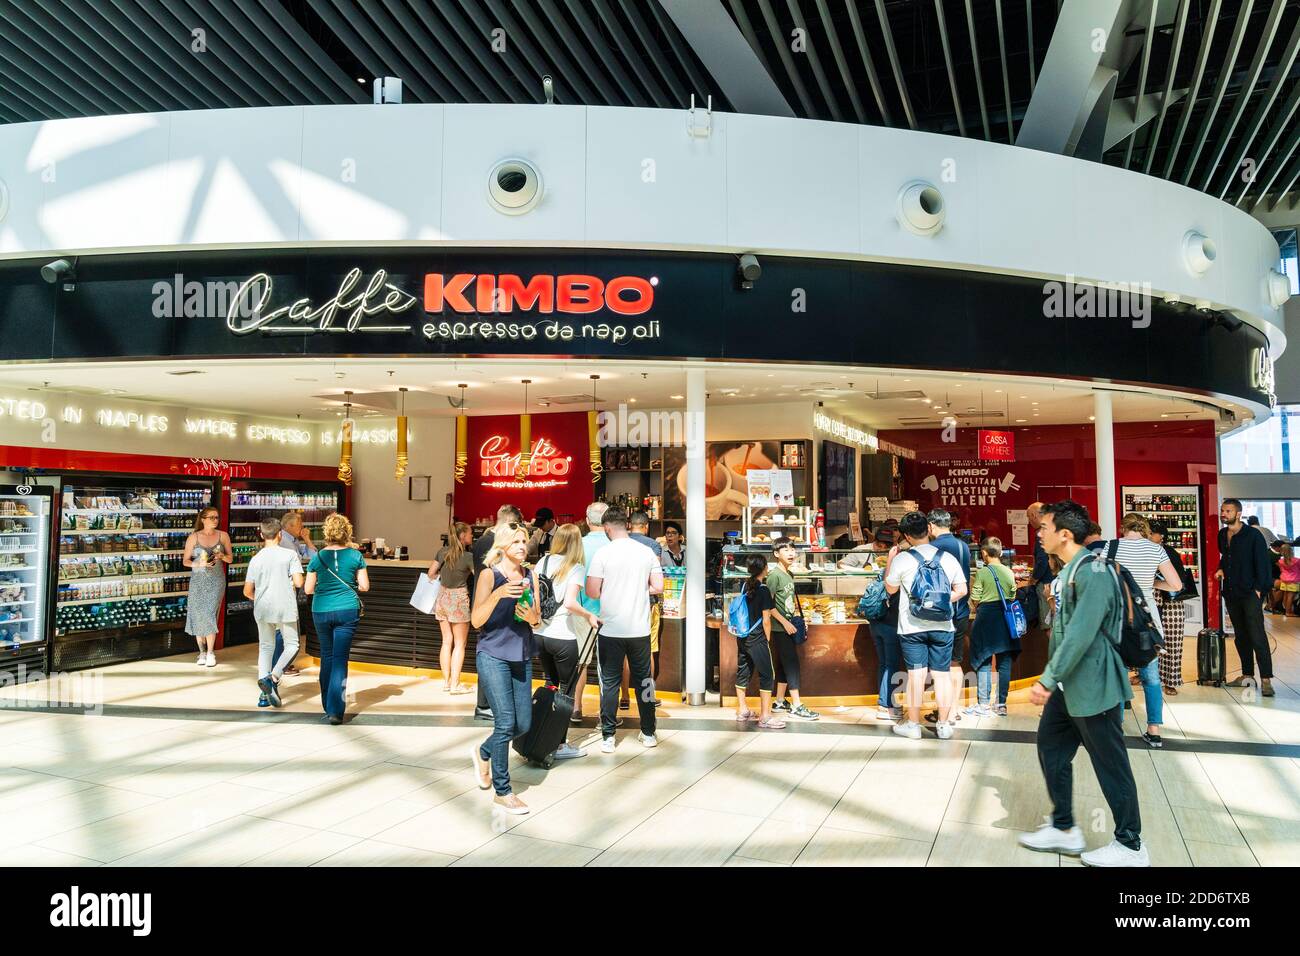 Interior of the E2nd floor of the departure area of Leonardo da Vinci - Fiumicino Rome airport, people at the main counter of the Caffe Kimbo eatery. Stock Photo